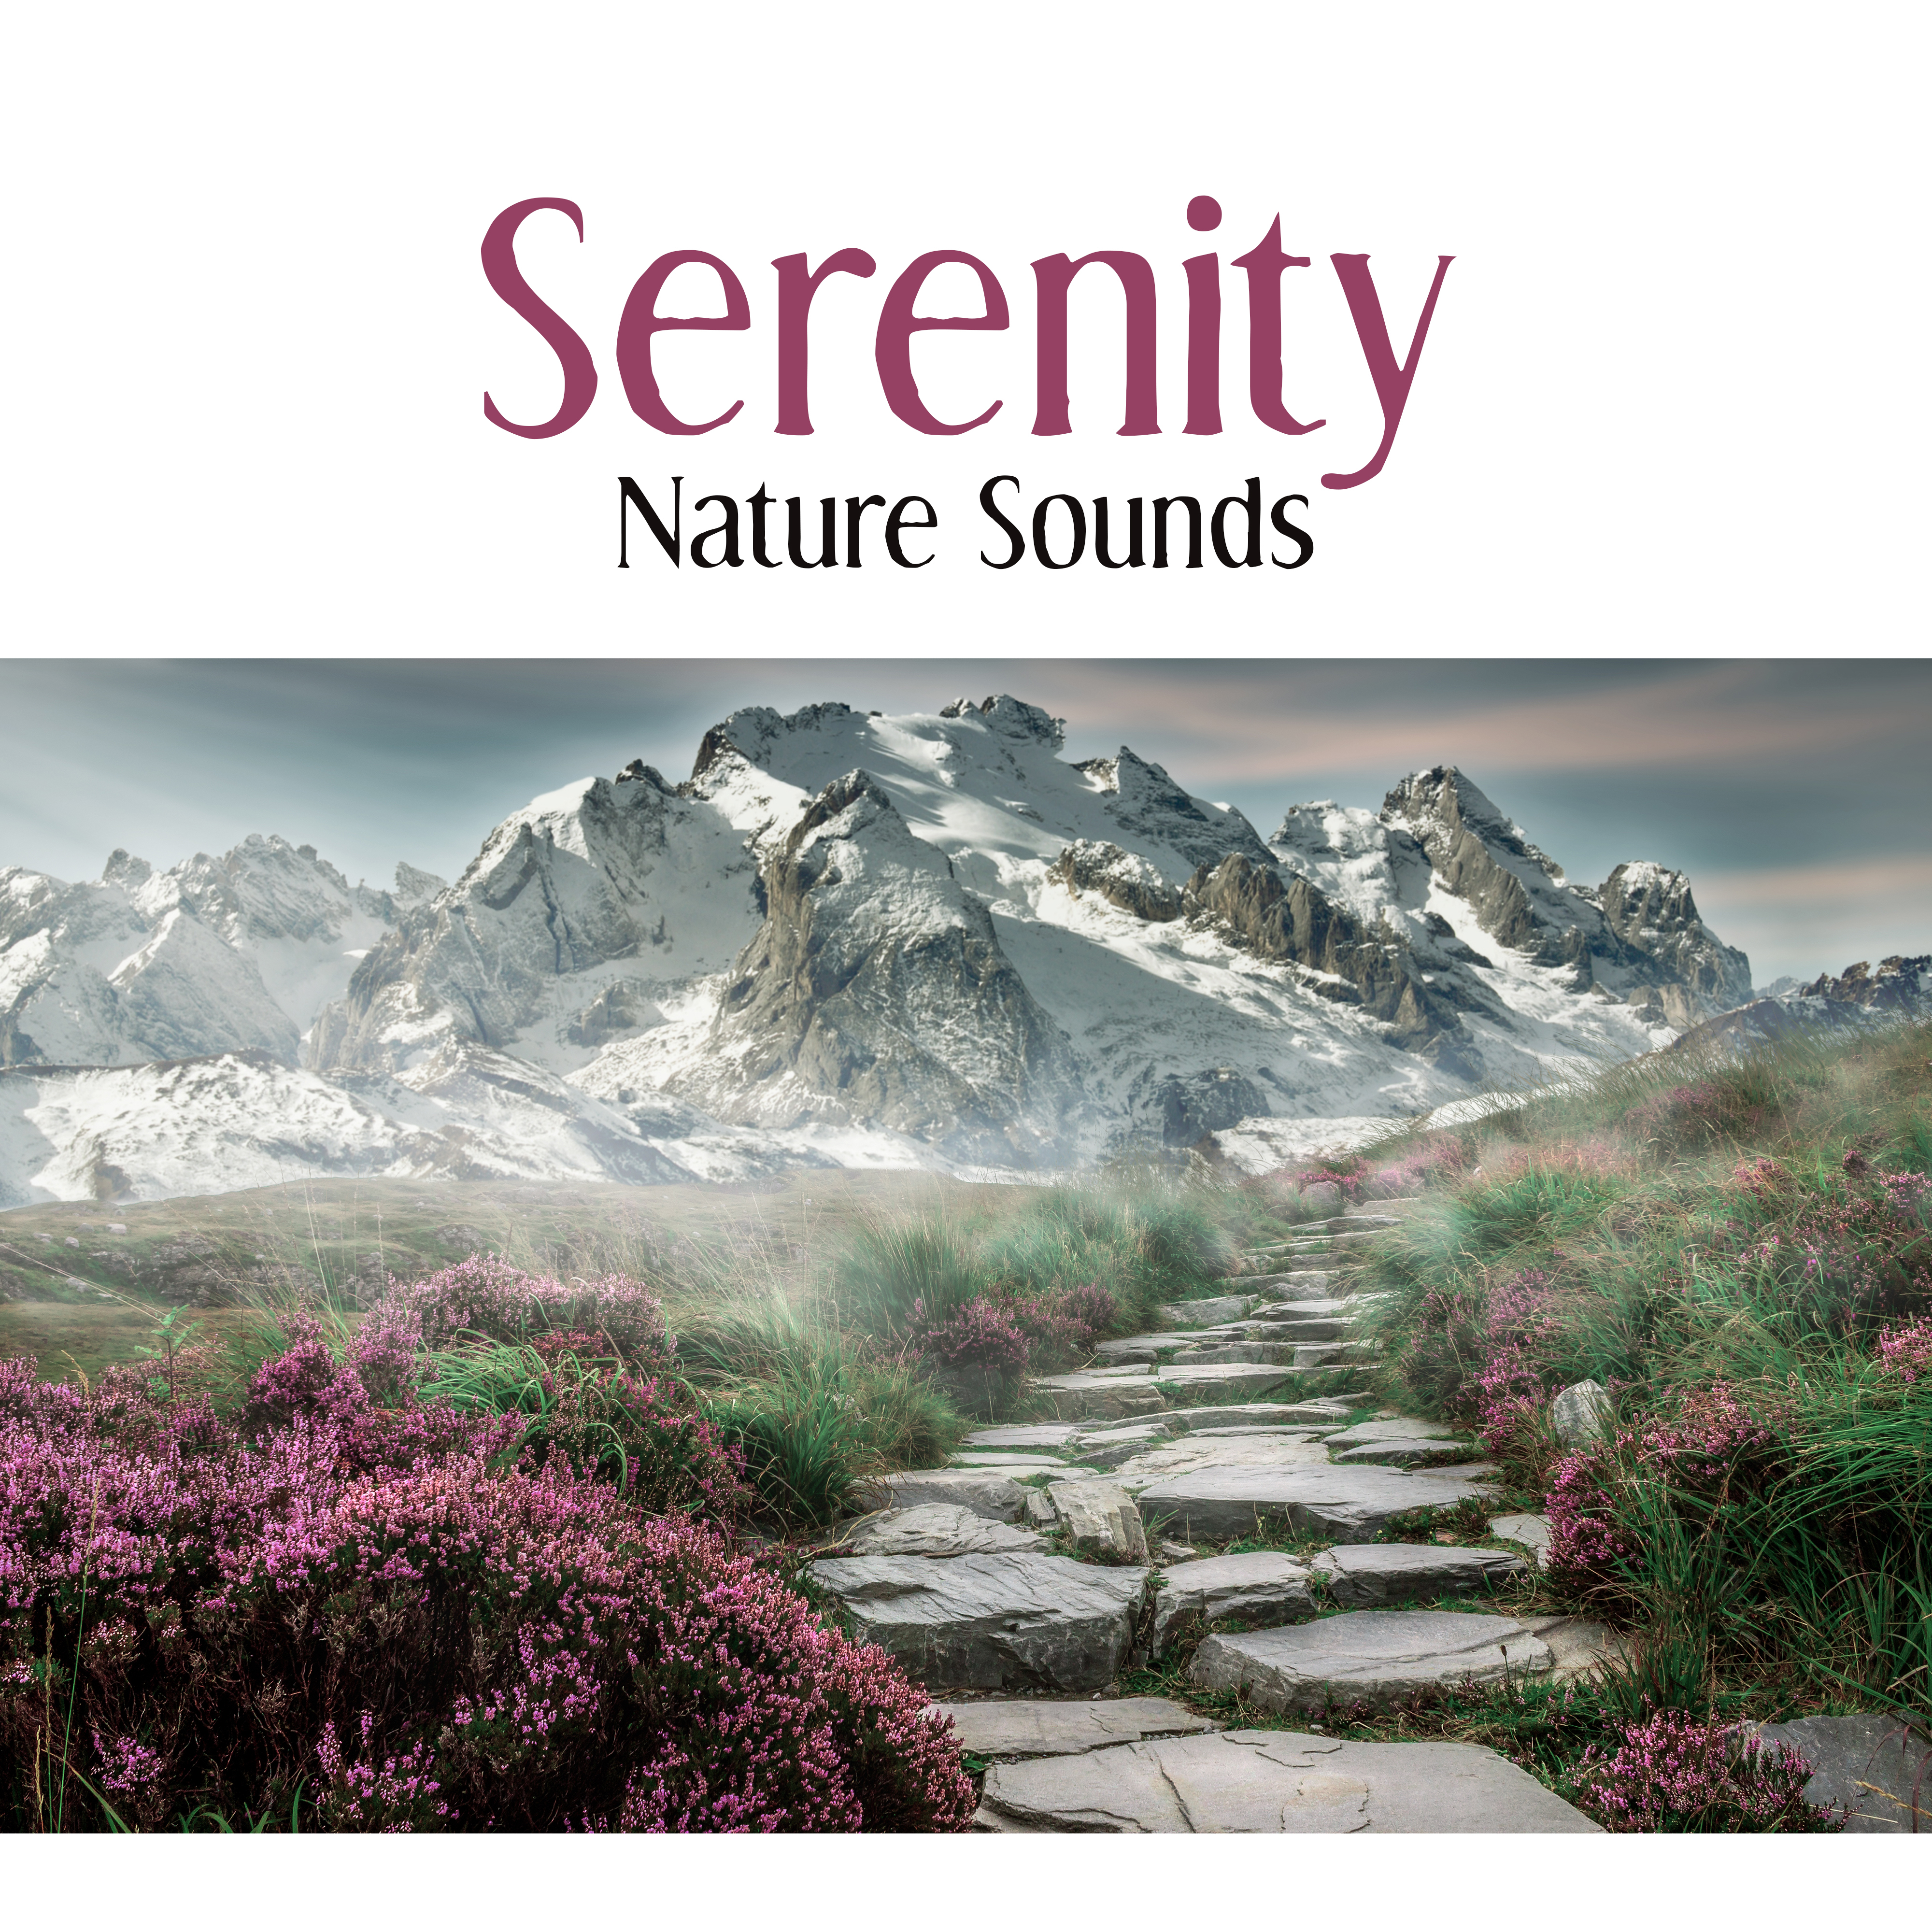 Serenity Nature Sounds  Relaxing Music Therapy, New Age 2017, Meditation, Relaxation, Zen Power